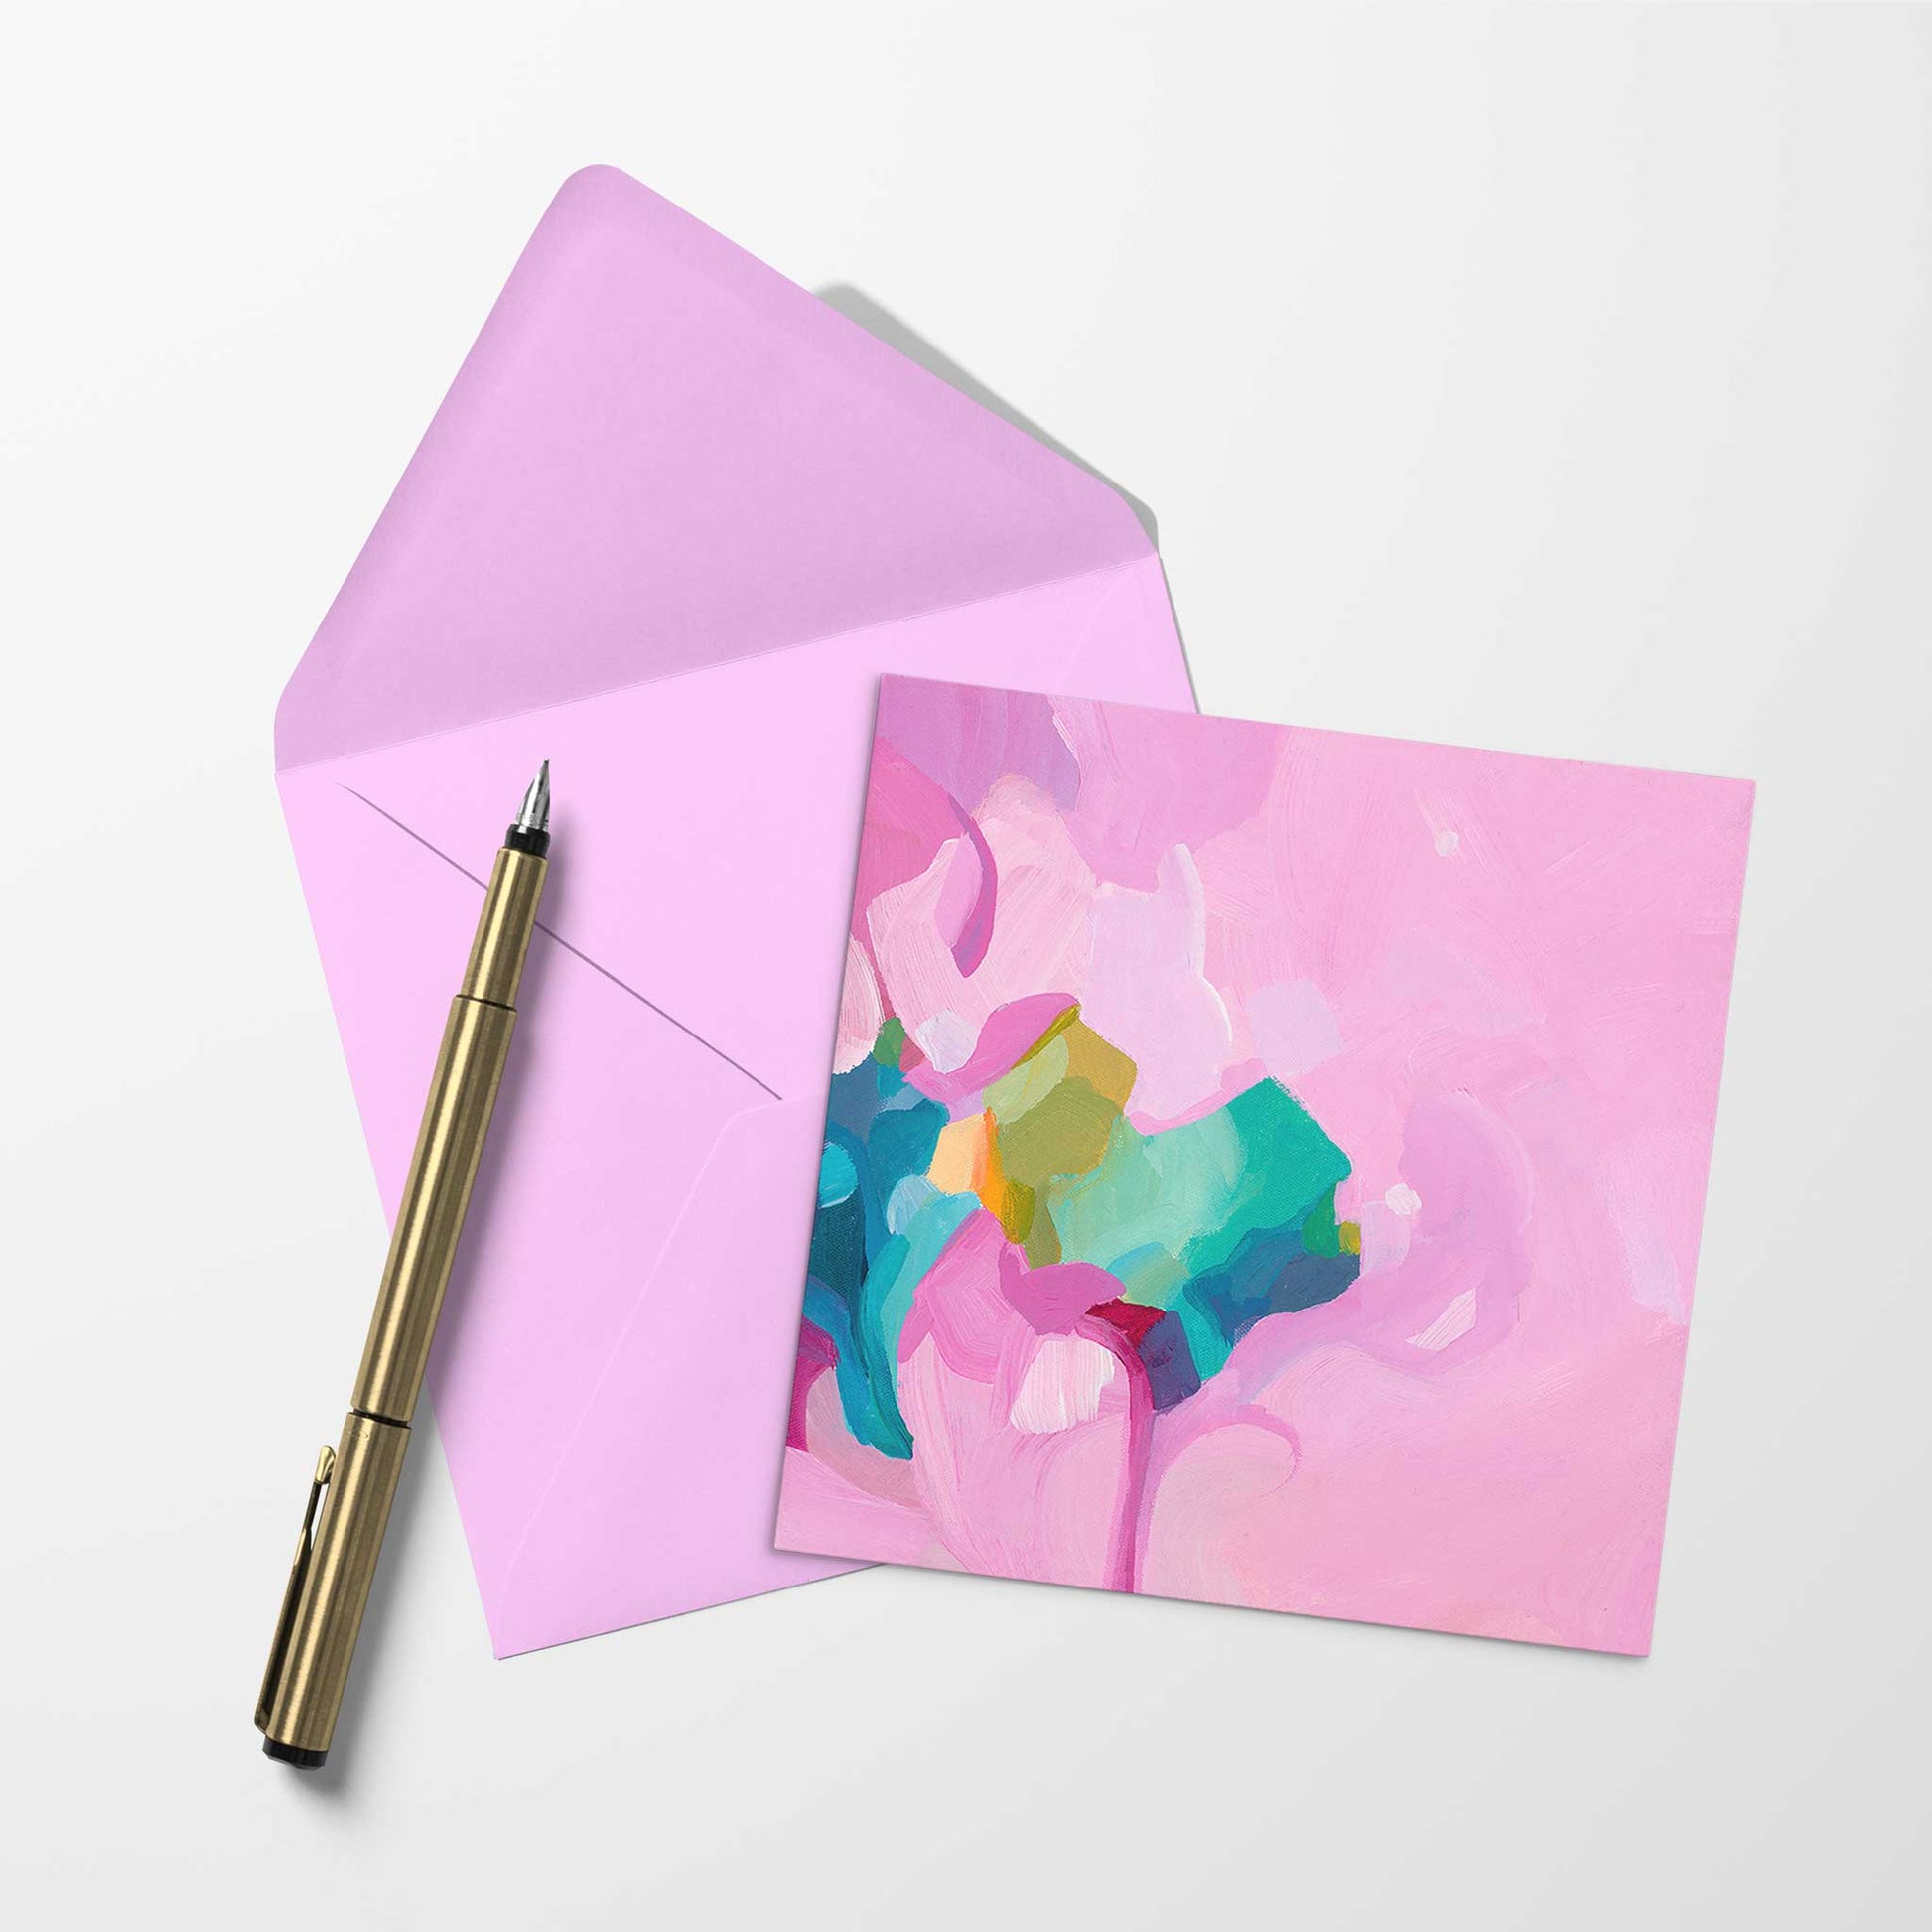 blank art card with amaranth pink abstract artwork and pink envelope